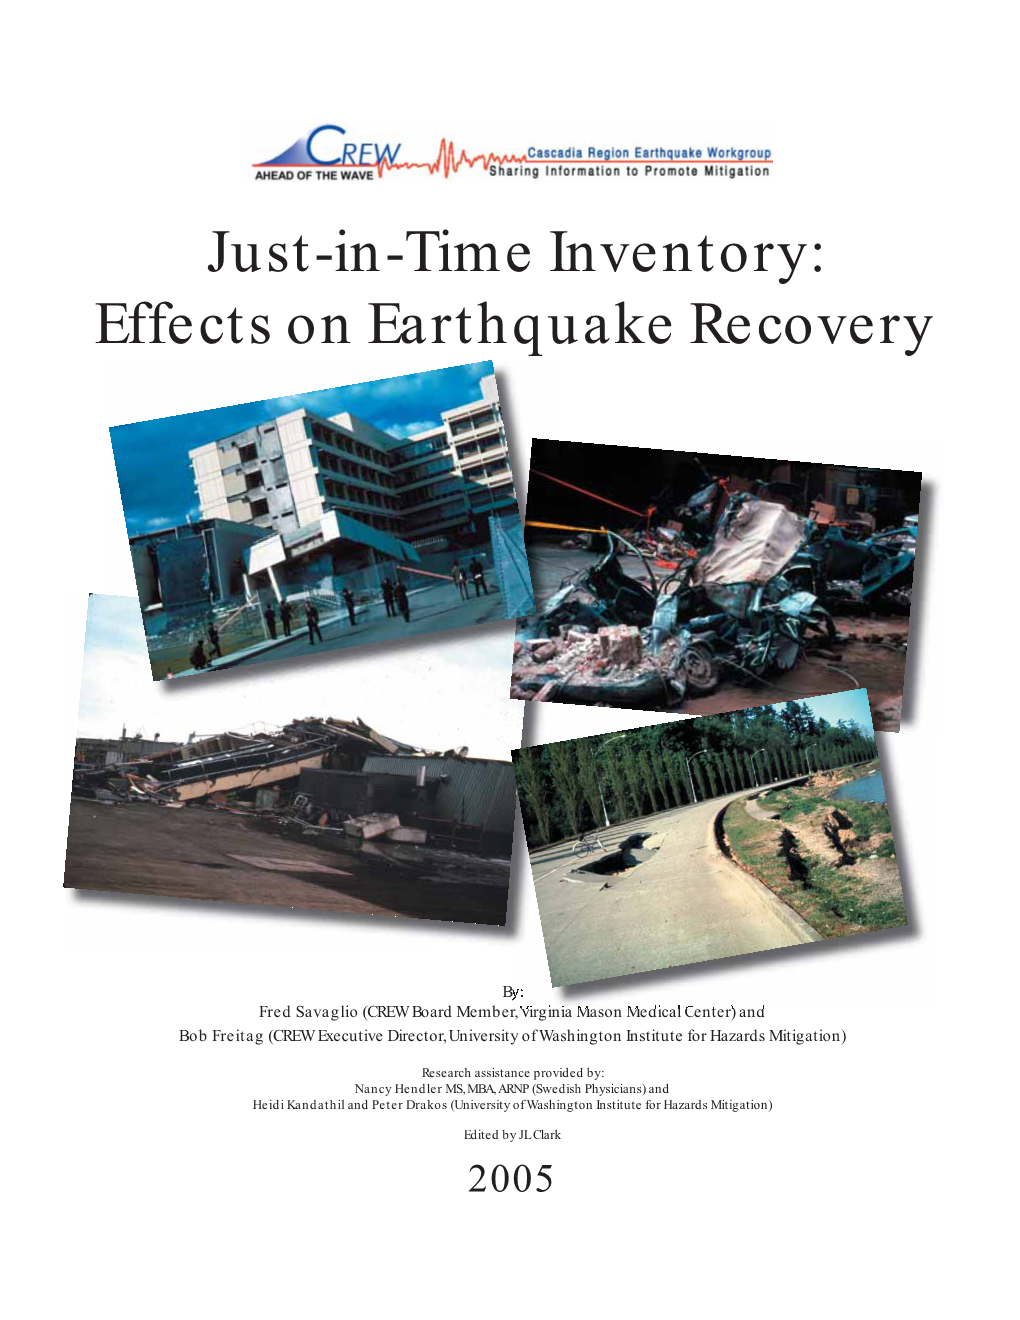 Just-In-Time Inventory: Effects on Earthquake Recovery